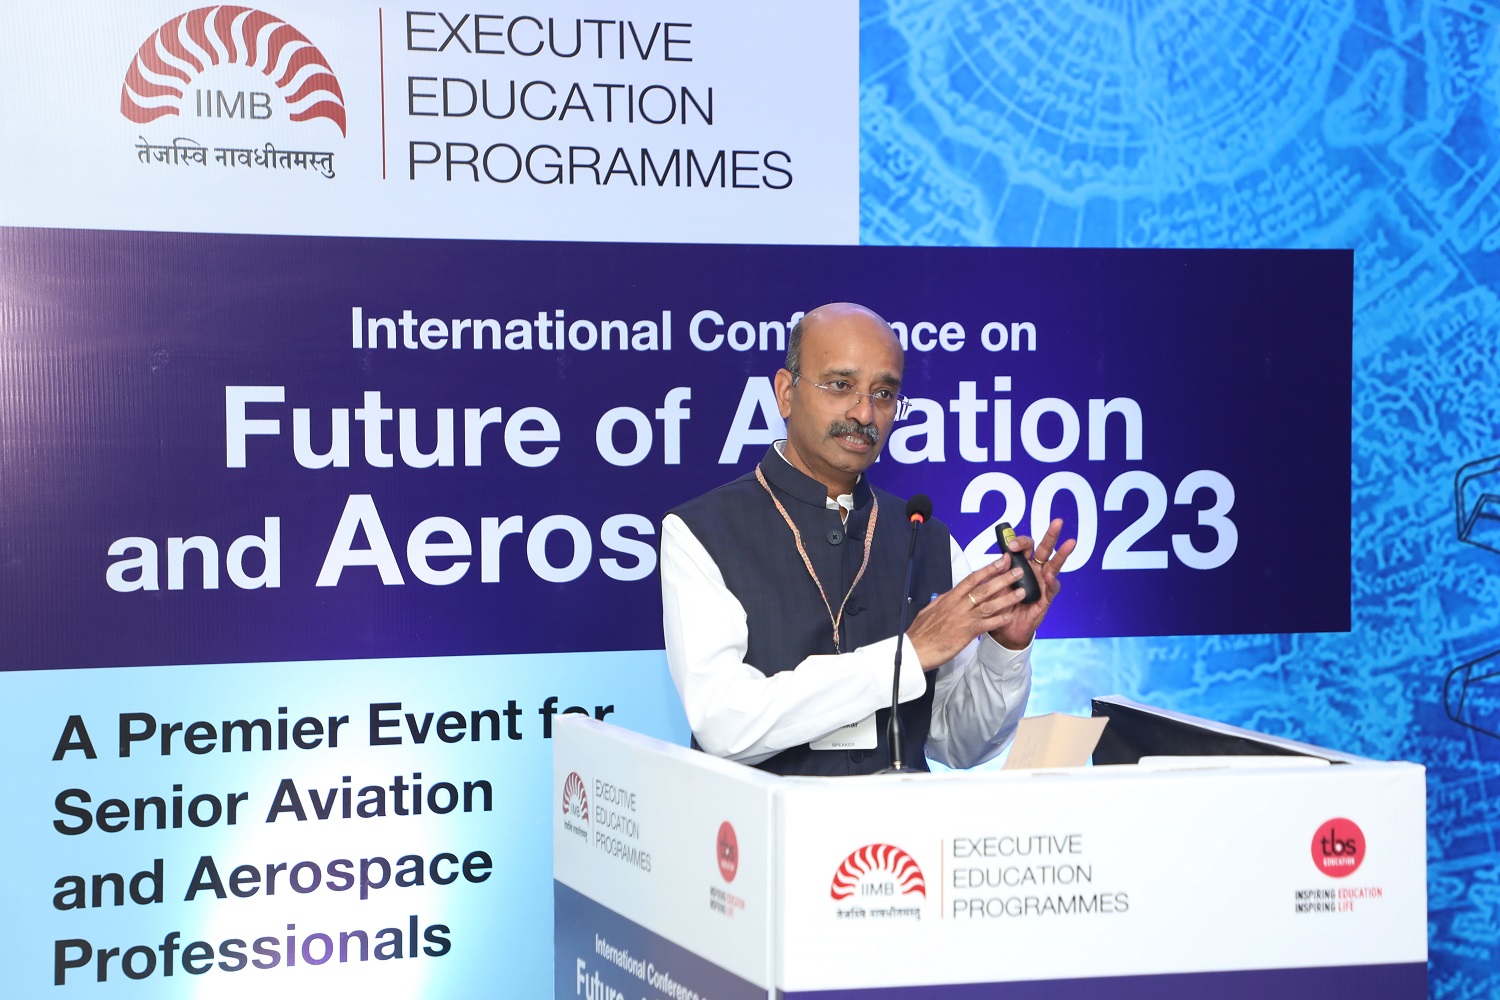 D Anand Bhaskar, MD and CEO, Air Works, speaks on 'MRO – The Opportunities and Challenges', during the International Conference on Future of Aviation and Aerospace (FOAA), hosted by the Office of Executive Education Programmes at IIMB, in partnership with Toulouse Business School (TBS), France, on 8th April 2023.